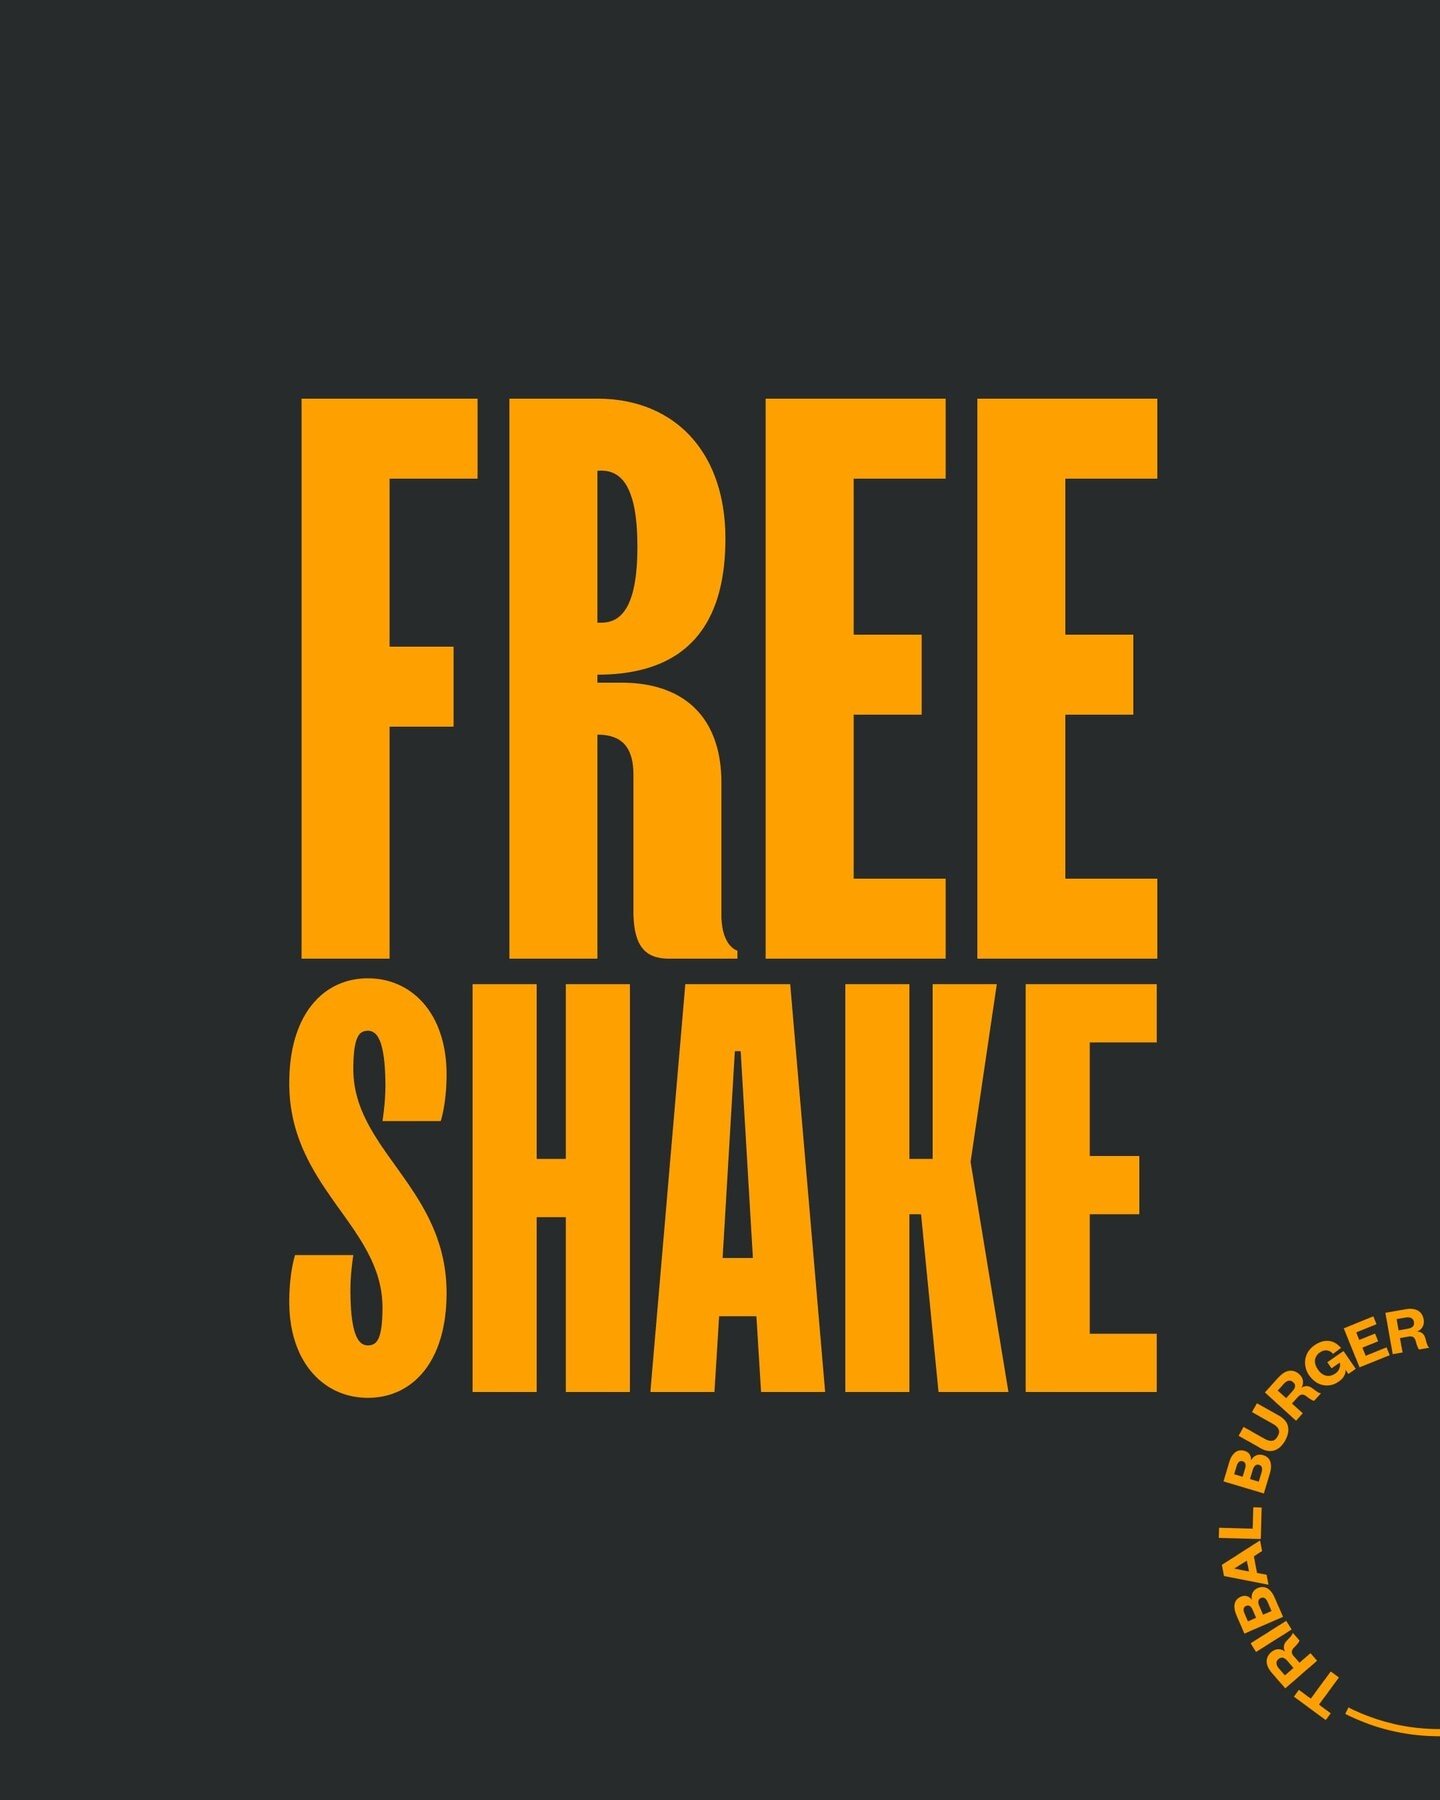 No way! TRIBAL Friends With Benefits are getting free shakes now!? 😯 Nab your free Friends With Benefits pass by smashing that link in bio and let us make you feel special with a hand-spun shake made with our own soft serve. Strawberry, Chocolate, V